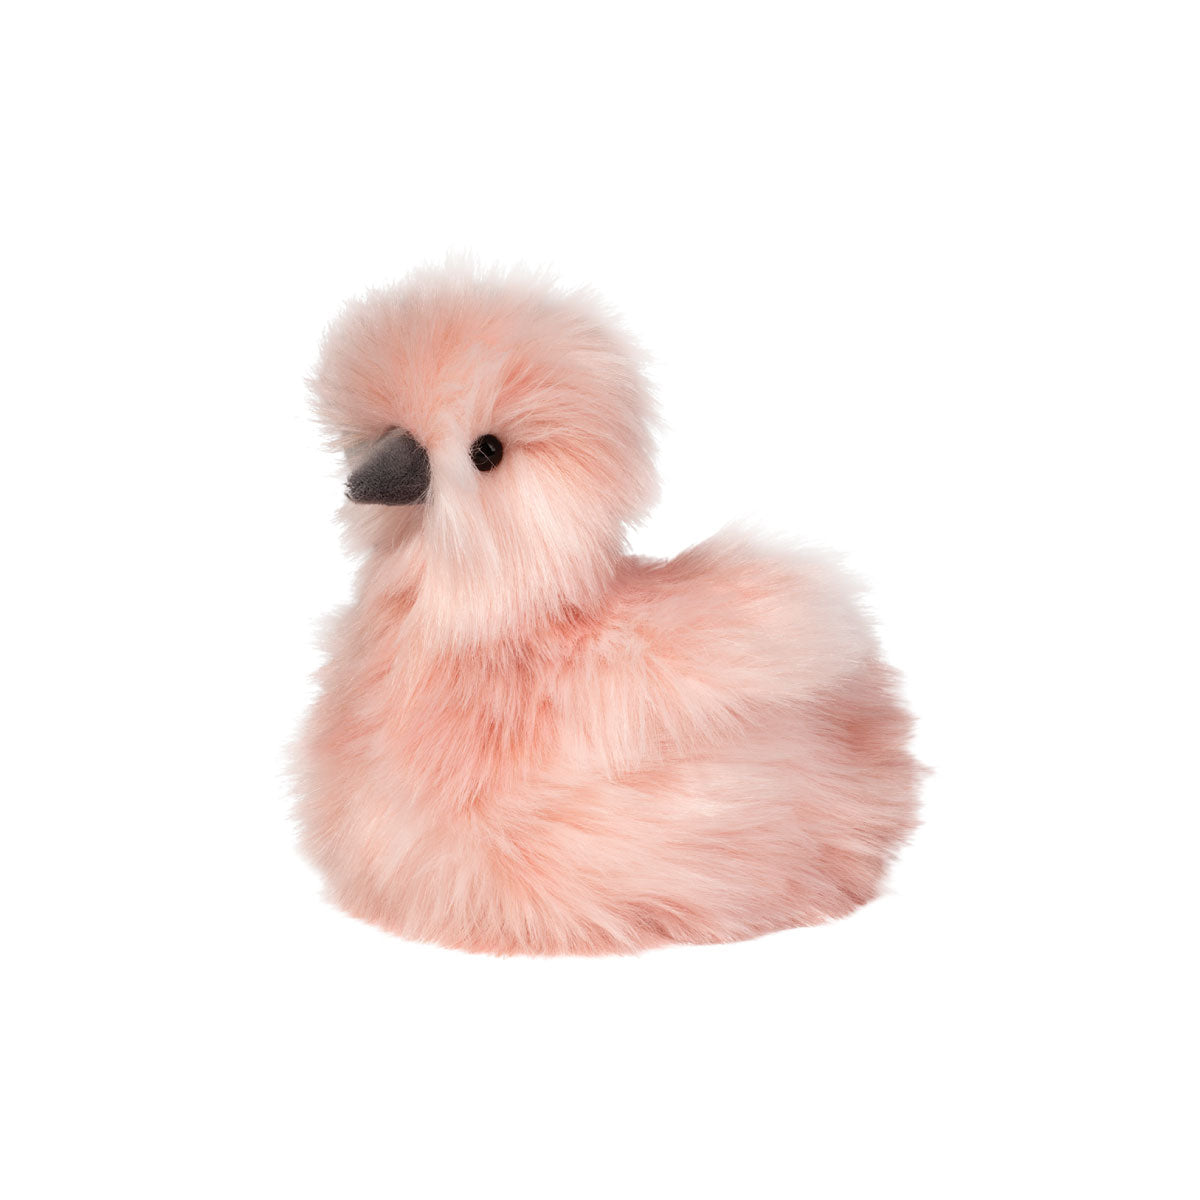 Mara Pink Silkie Chick from Douglas